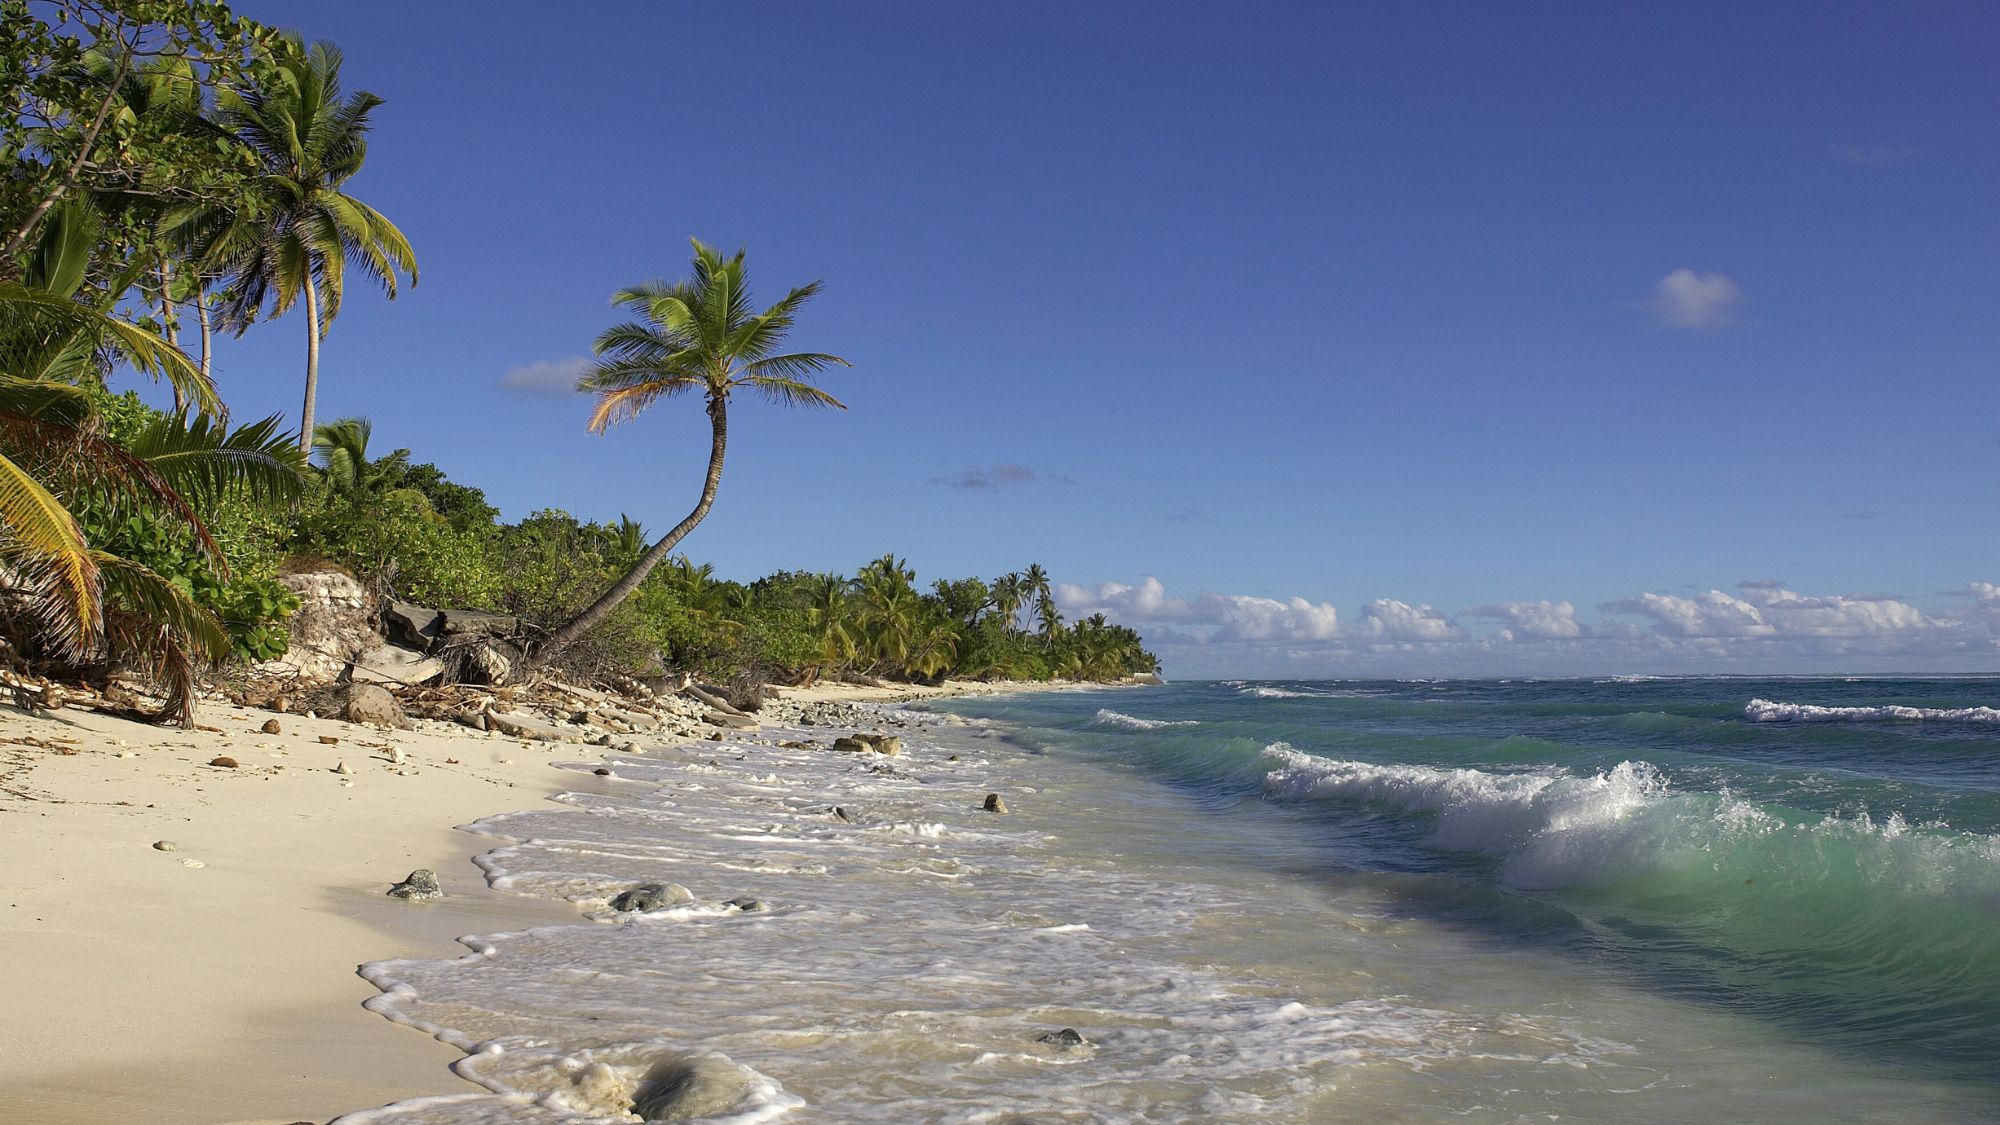 The Cocos Islands: a remote paradise in the Indian Ocean